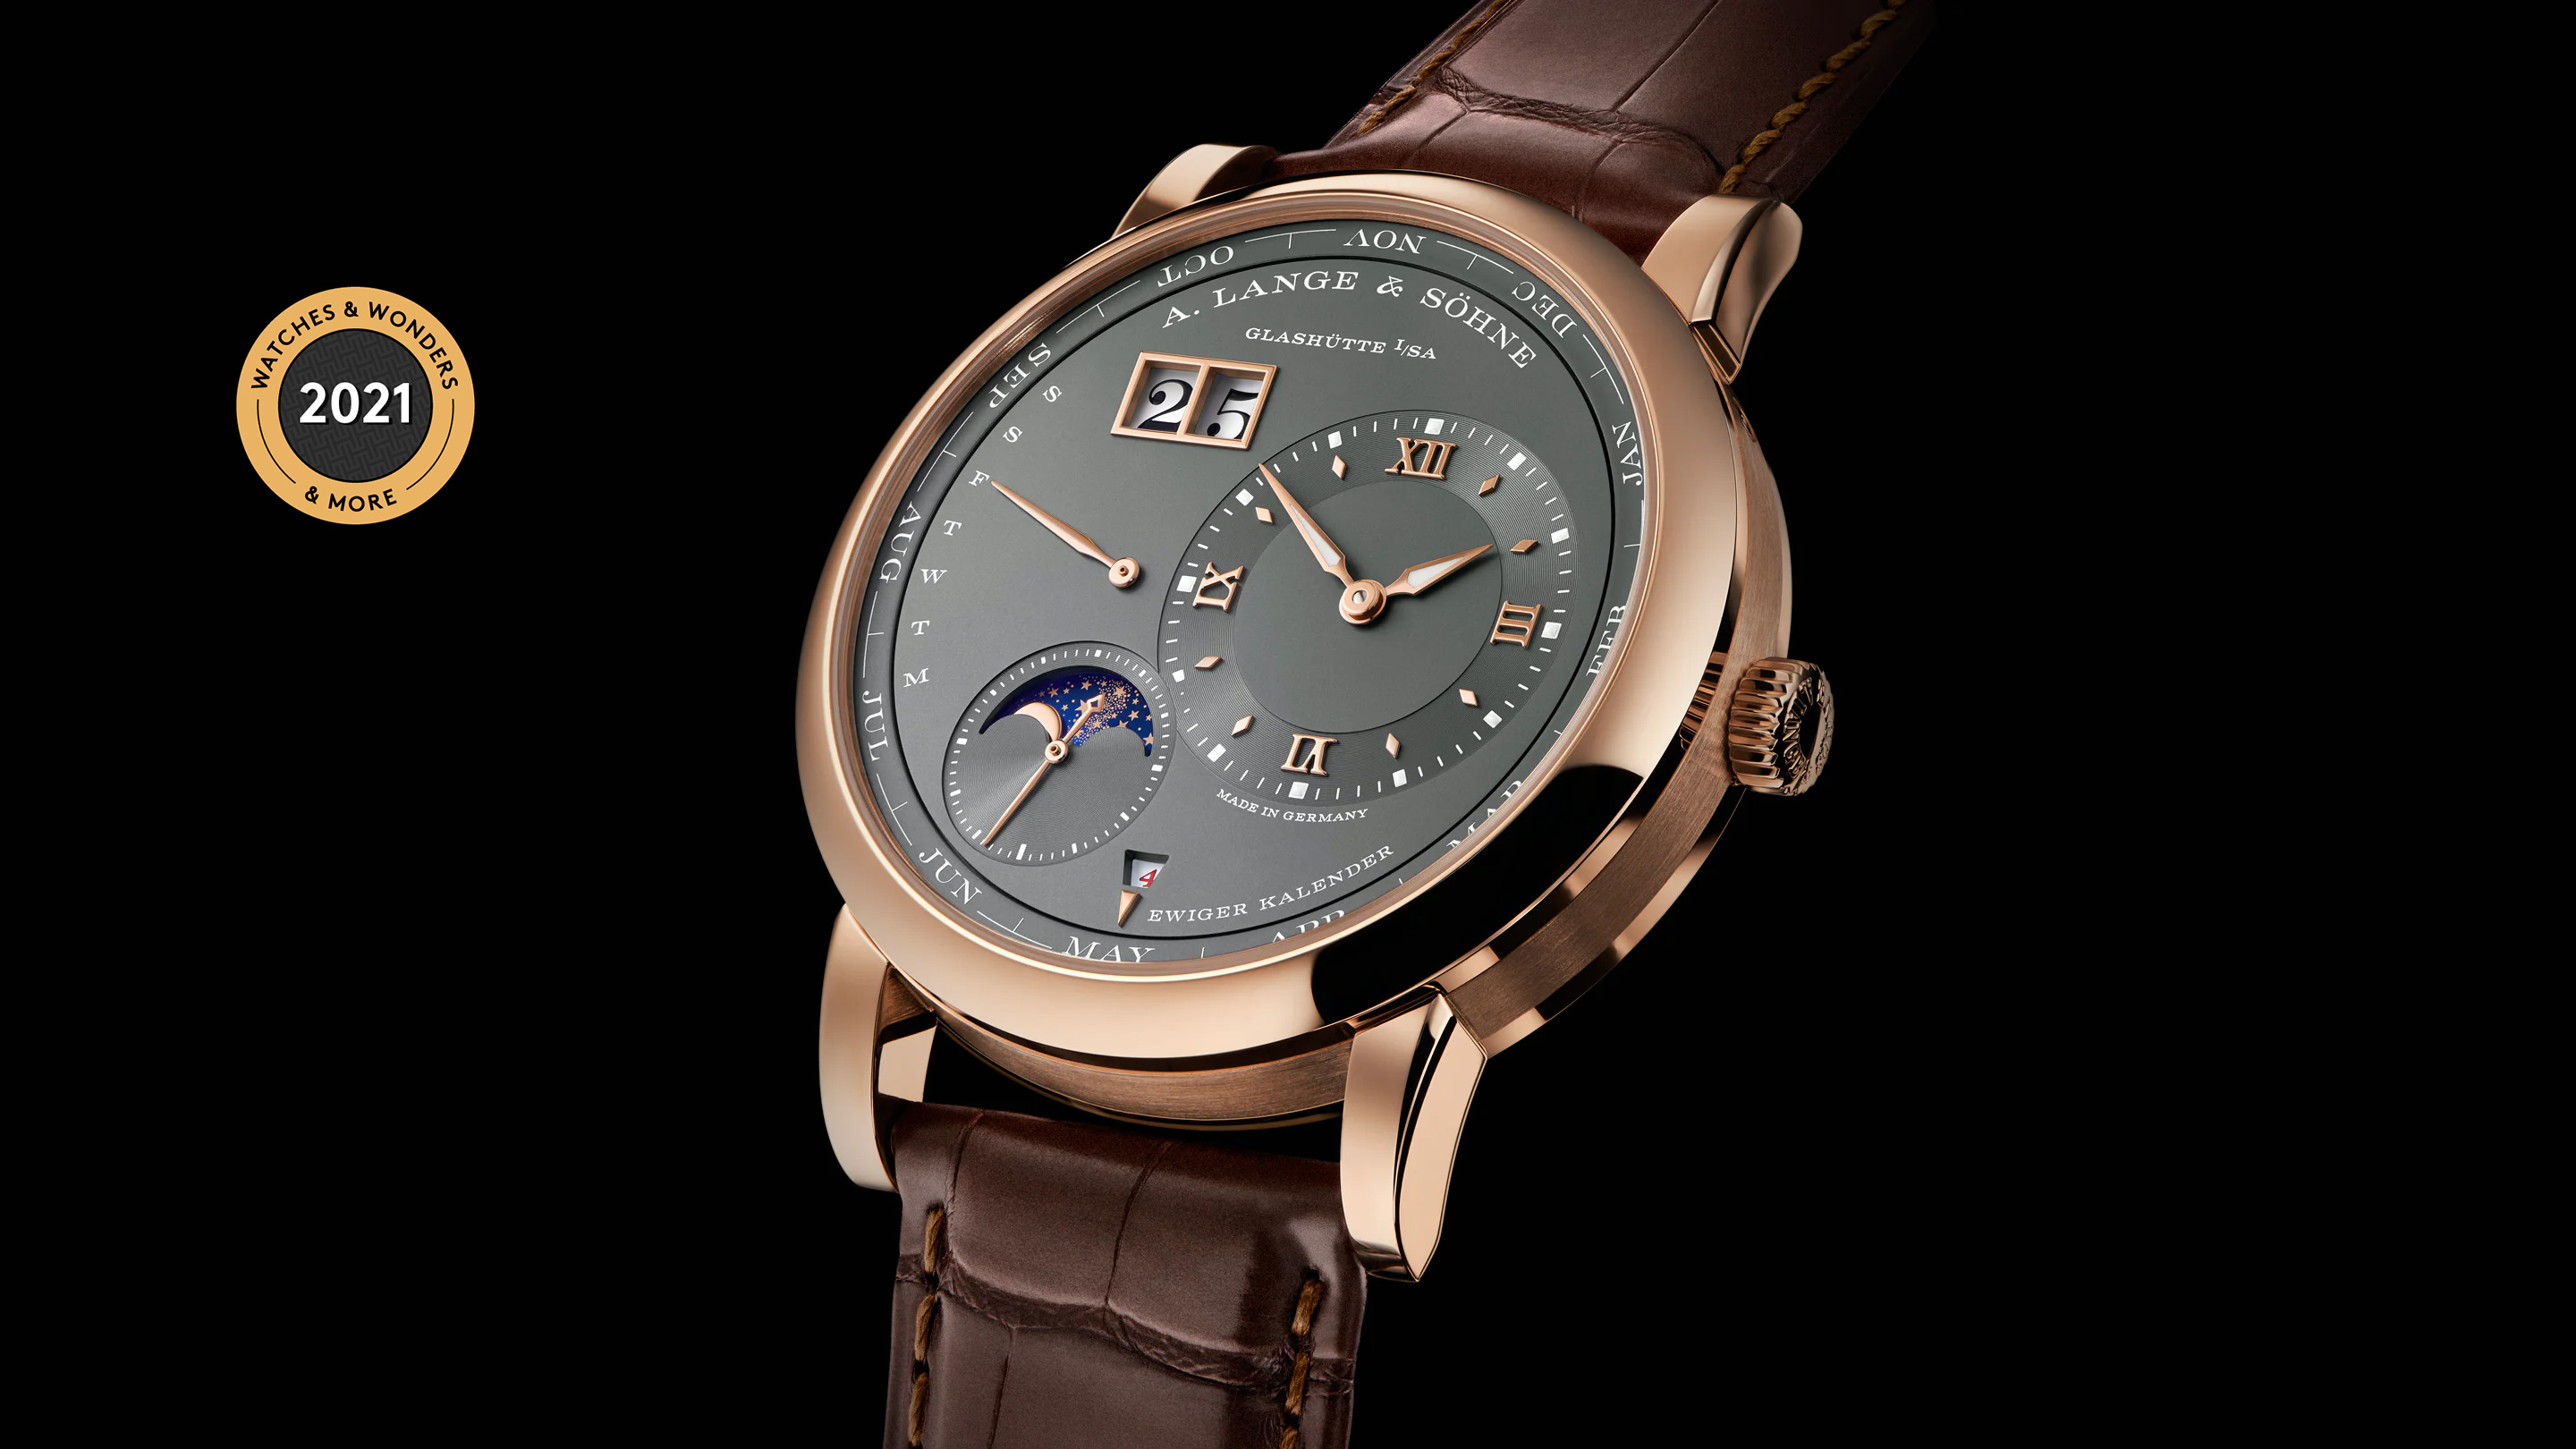 A. Lange & Söhne Just Introduced A New Lange 1 Perpetual Calendar